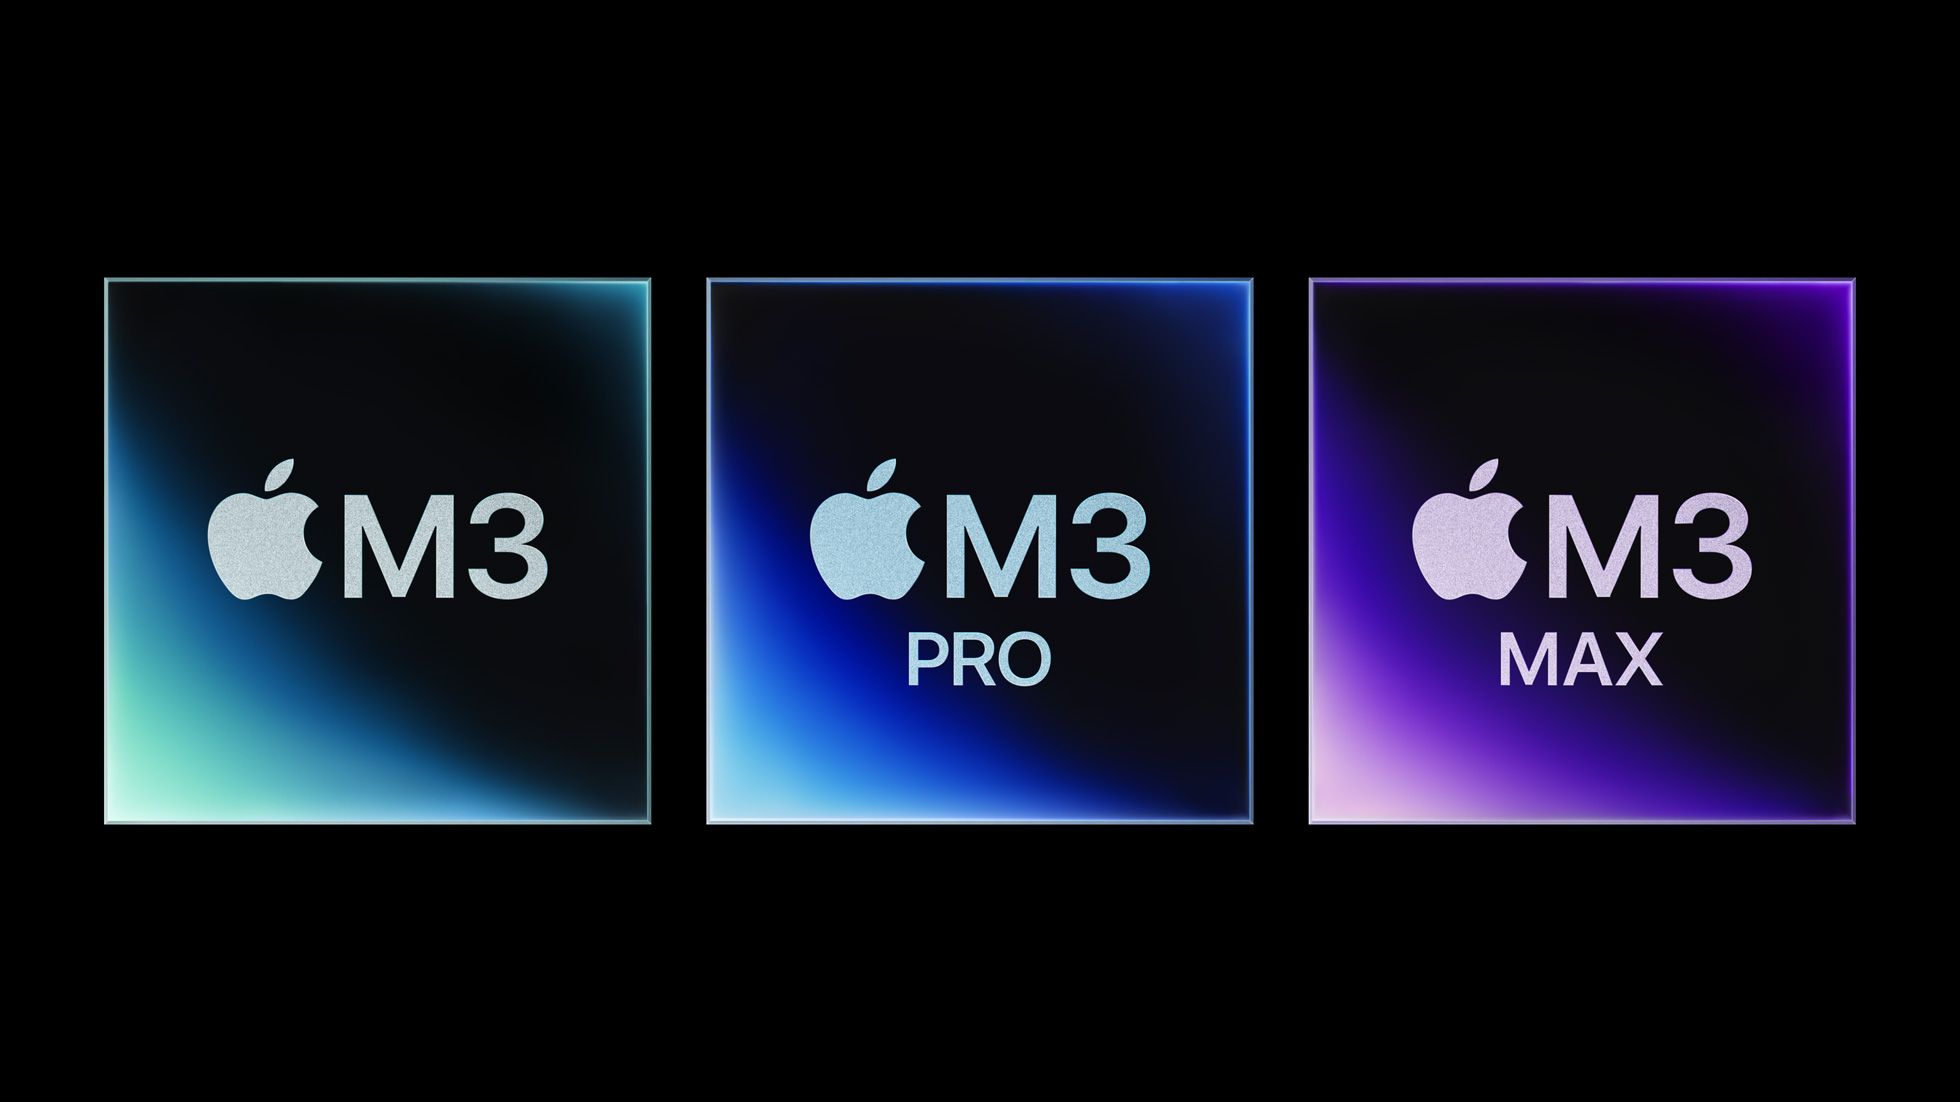 Apple unveils M3 chip family, MacBook Pro lineup, and iMac at Scary Fast event